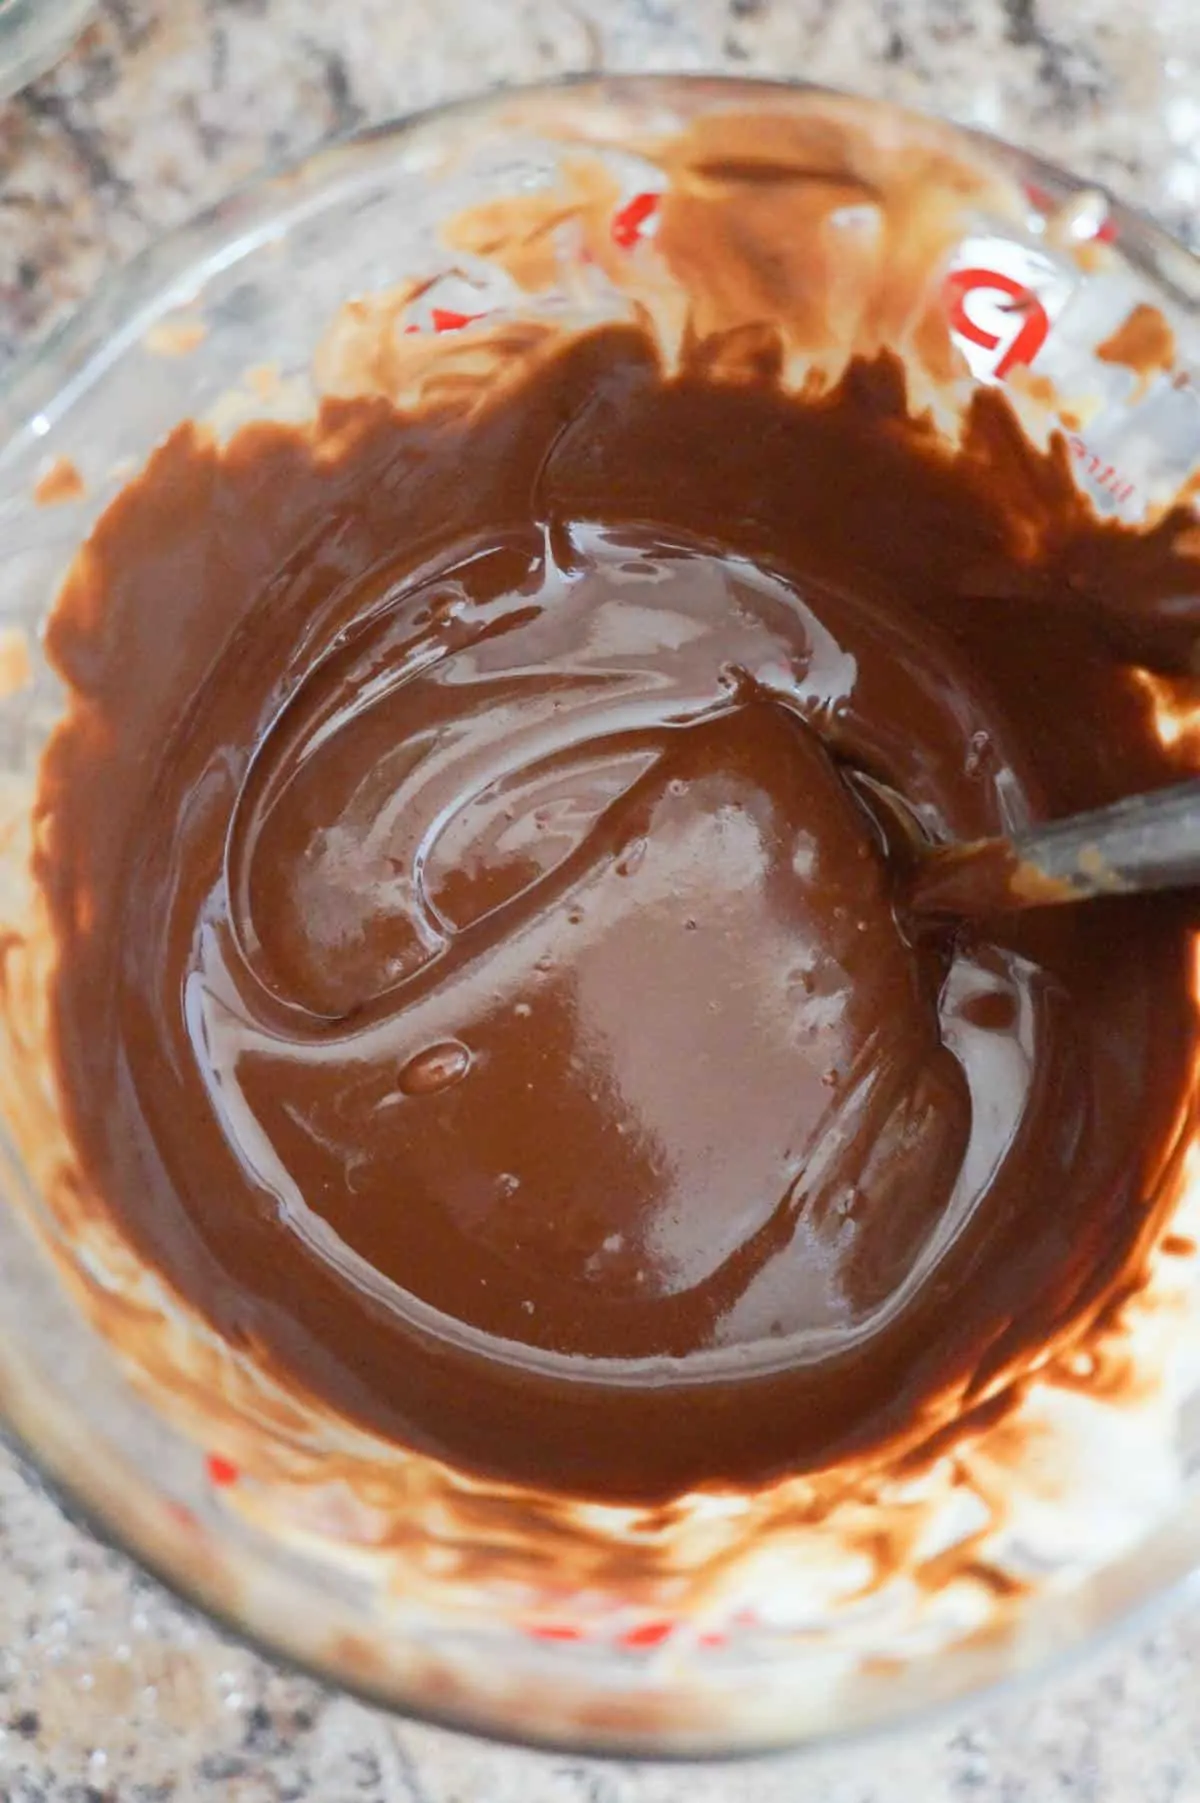 melted chocolate and peanut butter mixture in a glass measuring cup